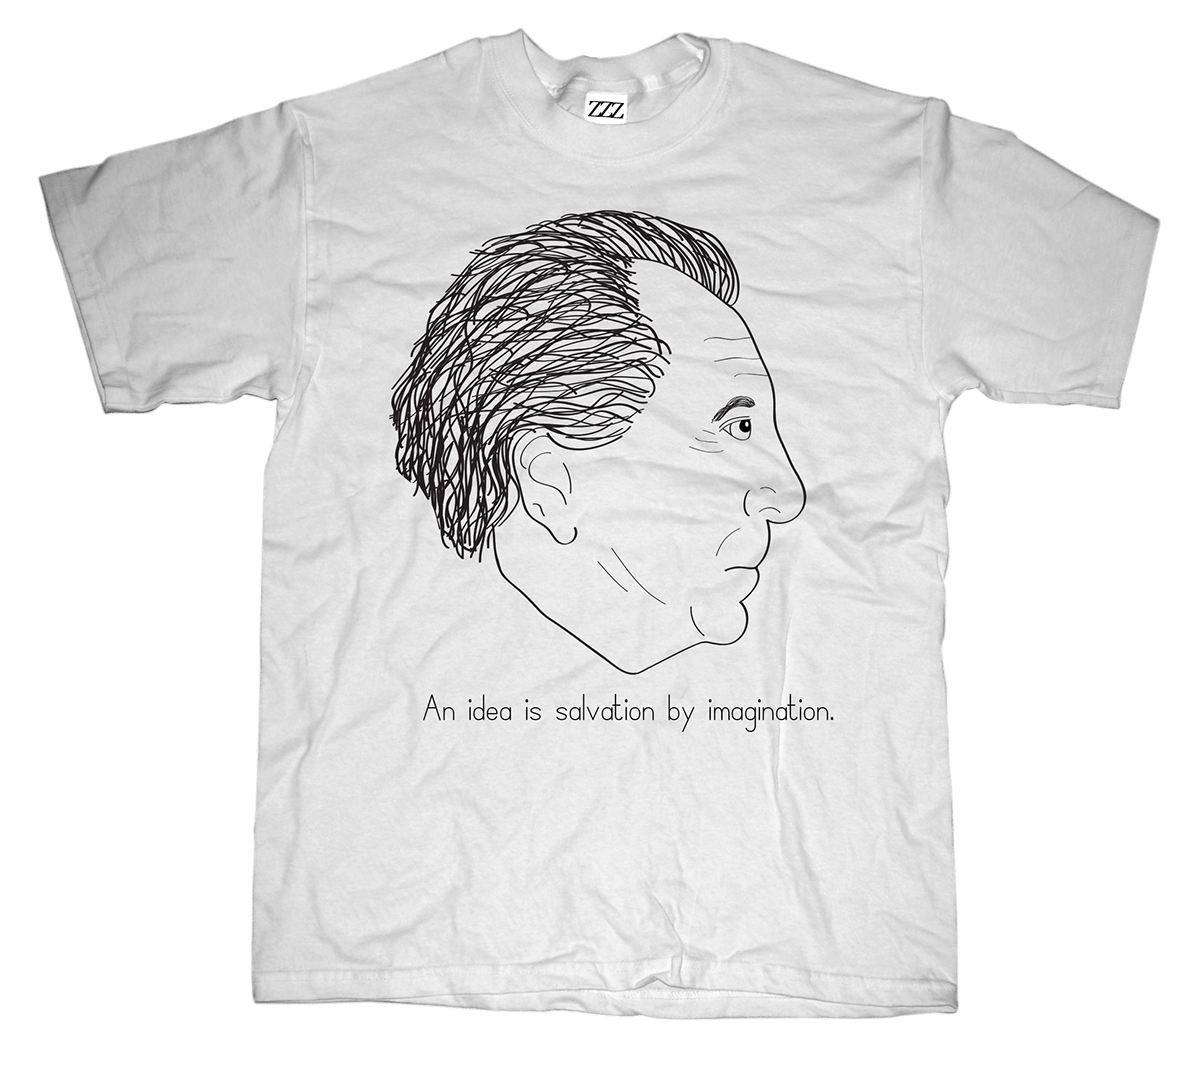 ludwig mies Van der Rohe less is more tshirt frank lloyd wright le Corbusier architects